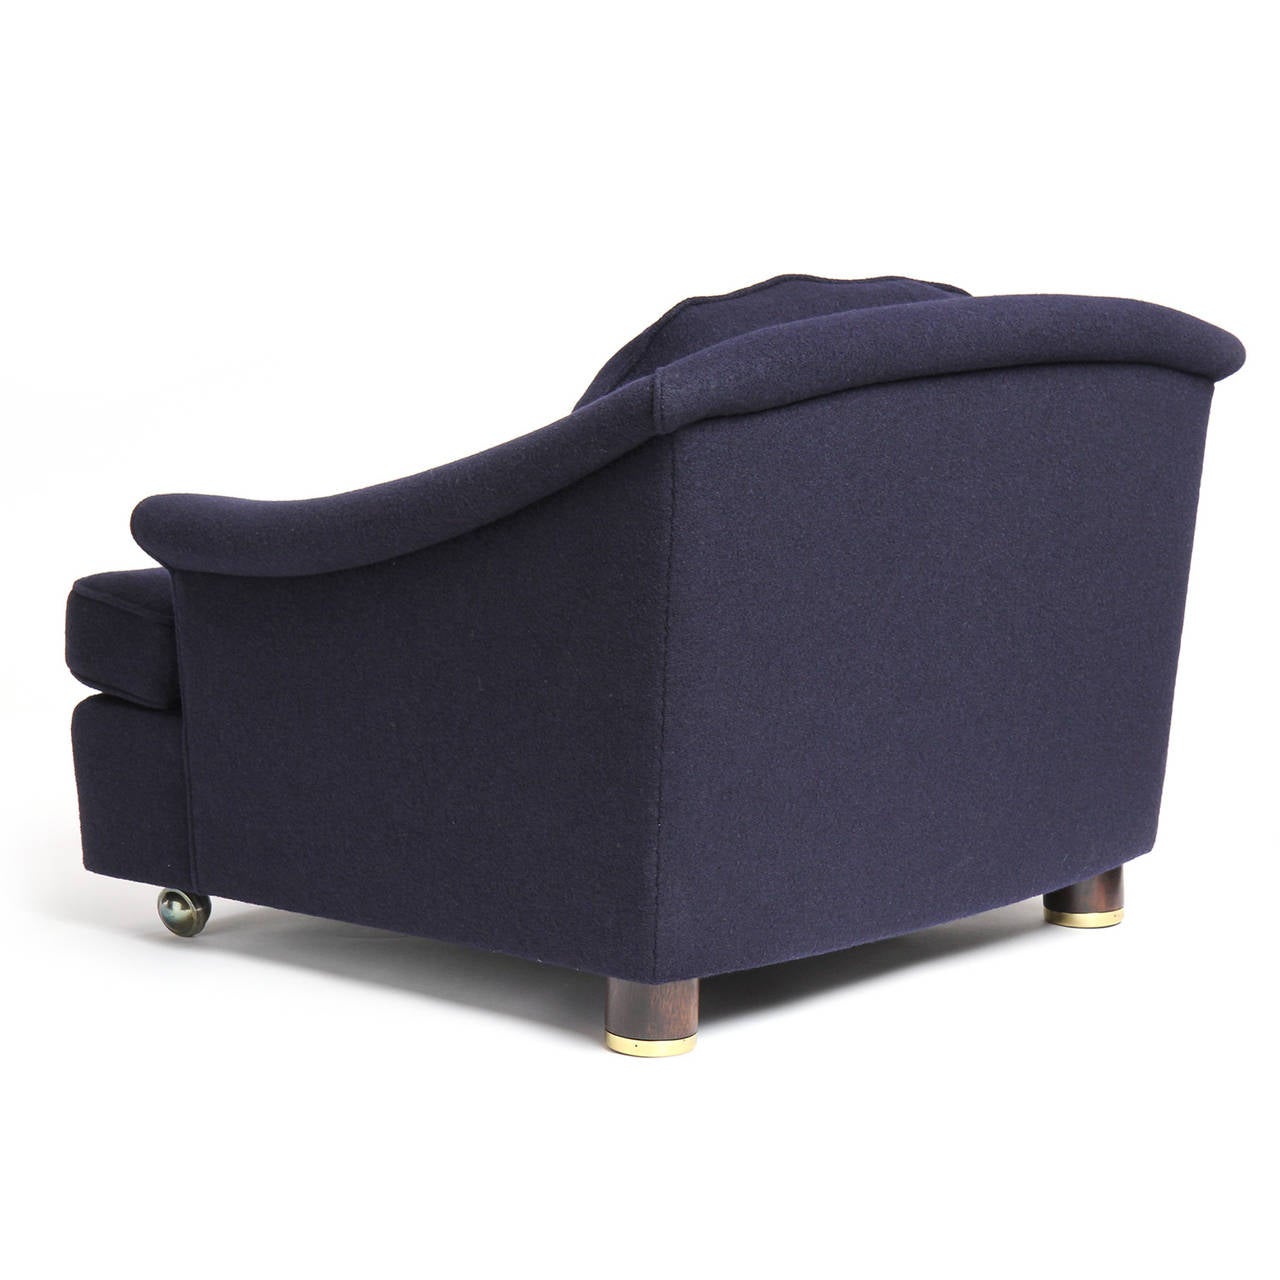 Mid-20th Century Lounge Chair by Edward Wormley